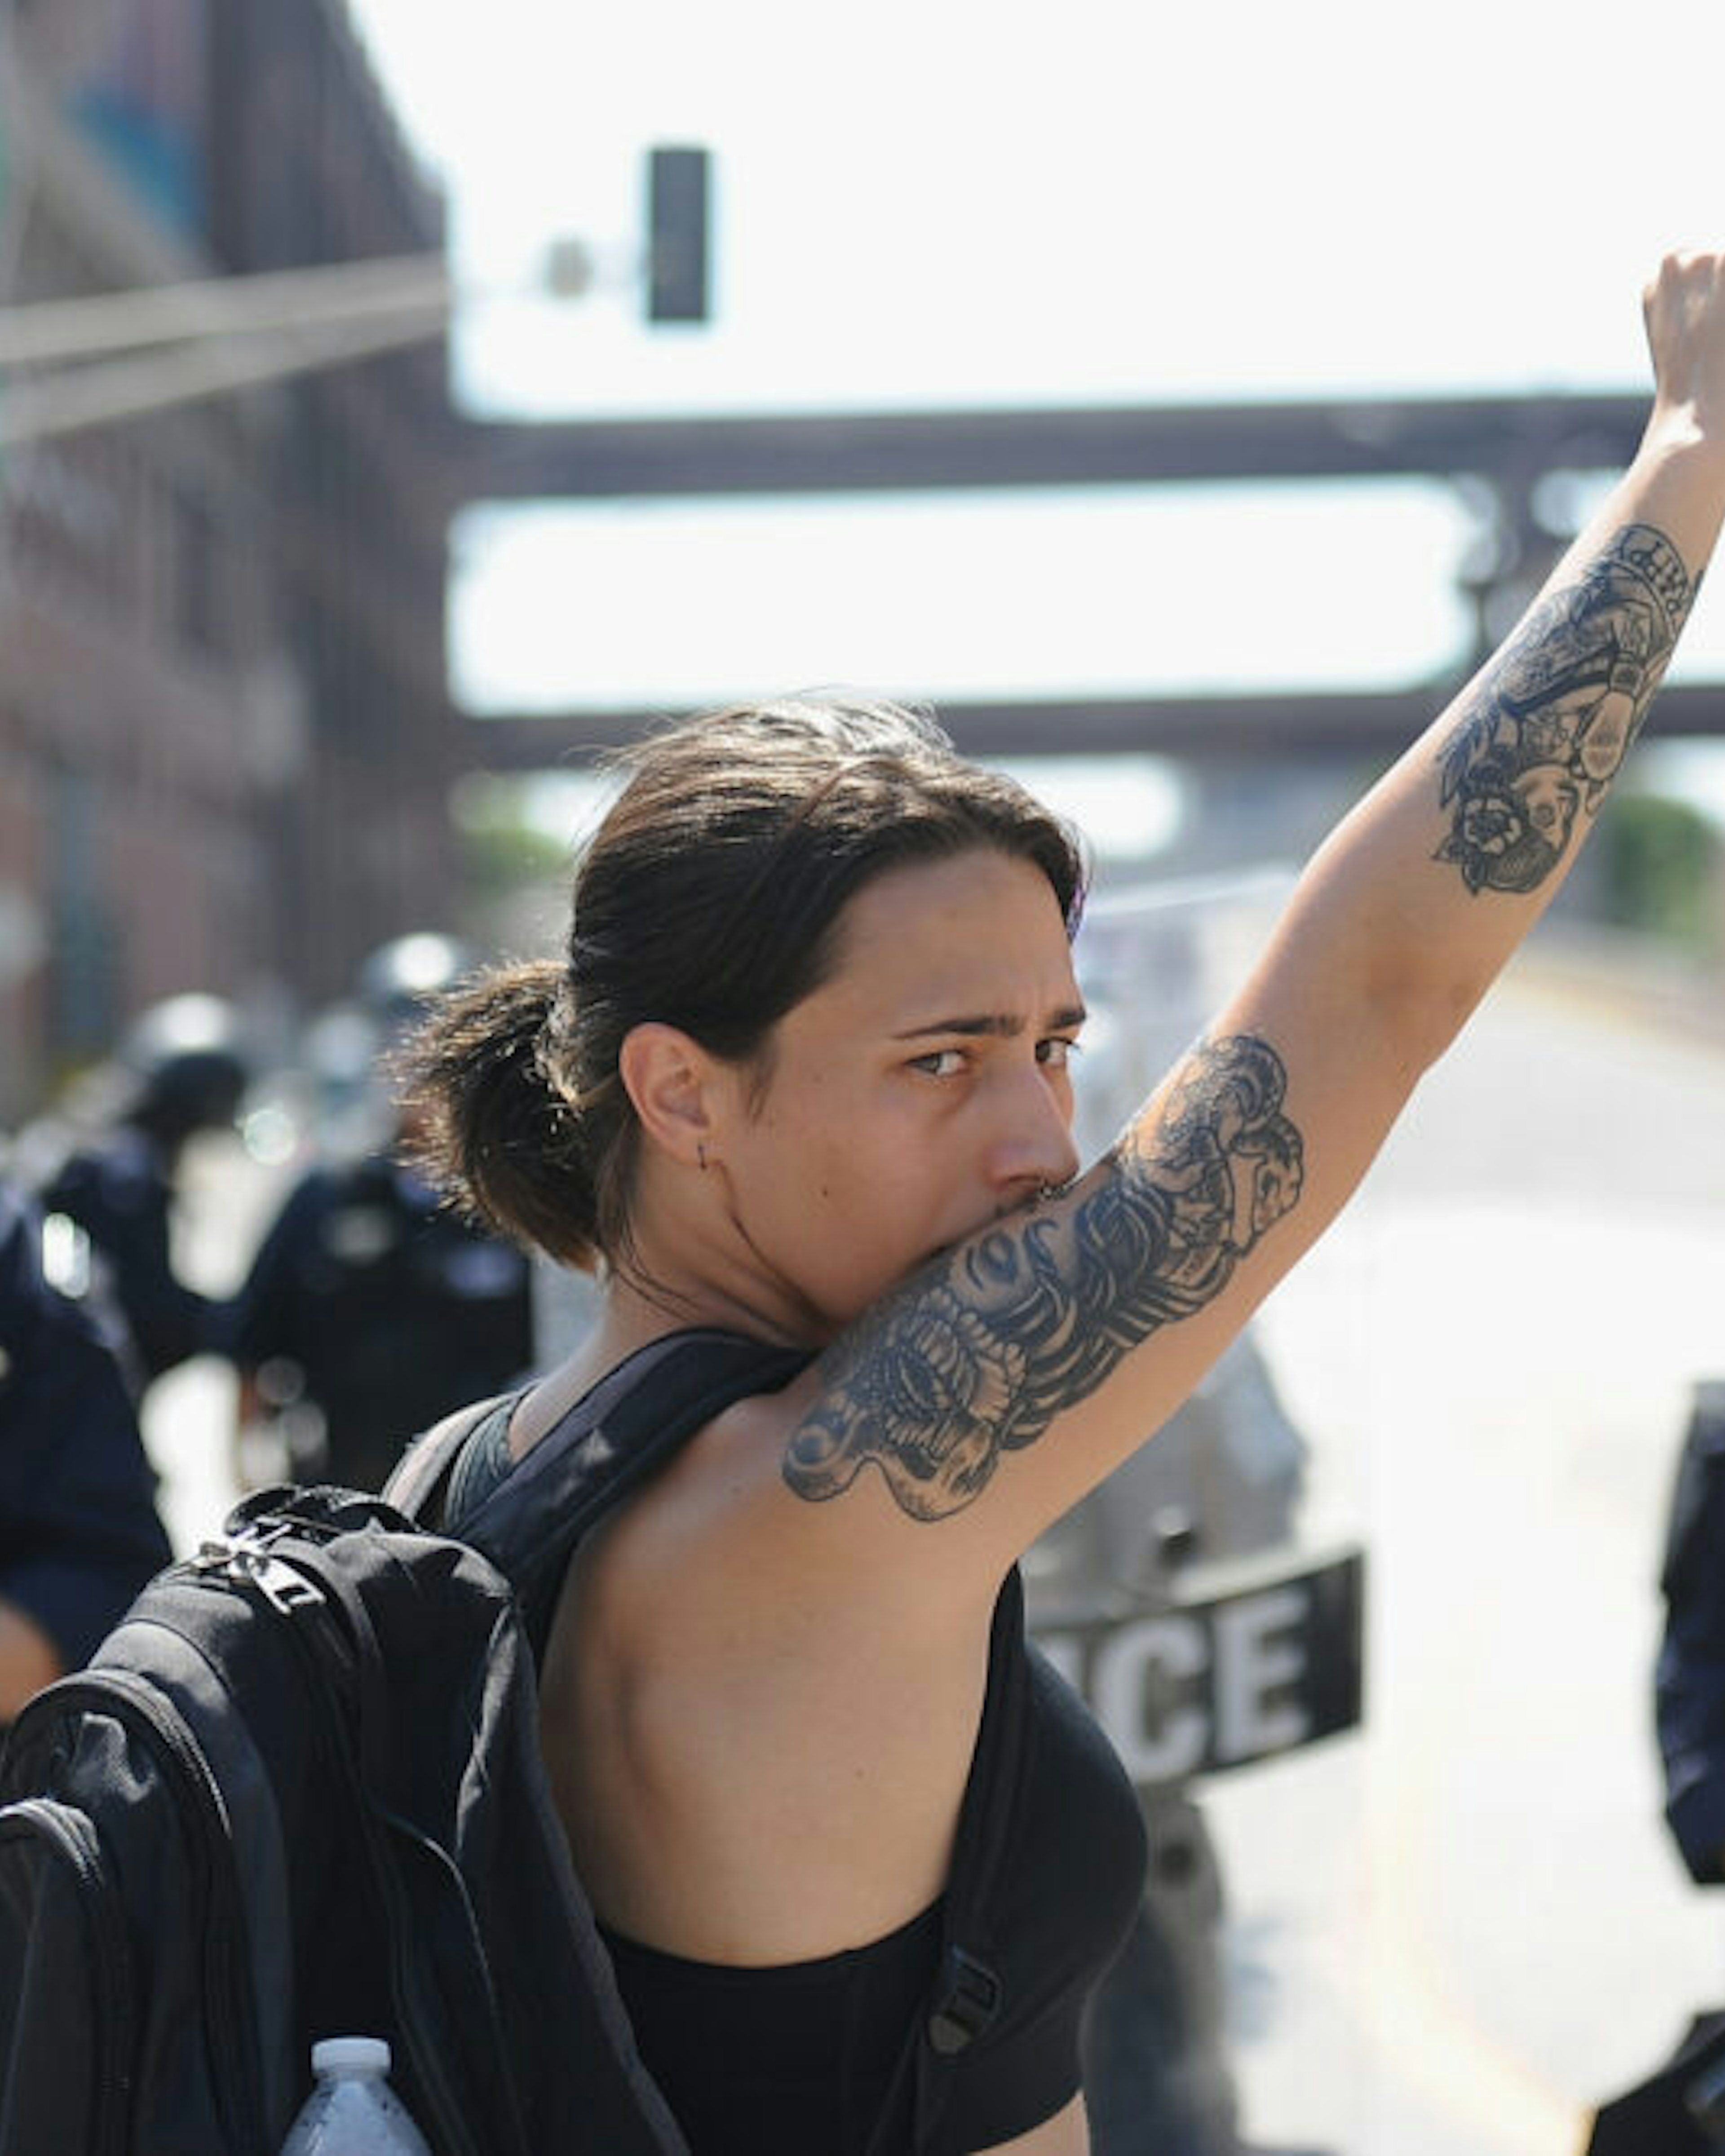 ST. LOUIS, MO - SEPTEMBER 15: A woman raises her fist as she approaches a line of police officers in riot gear during a protest action following a not guilty verdict on September 15, 2017 in St. Louis, Missouri. Protests erupted today following the acquittal of former St. Louis police officer Jason Stockley, who was charged with first-degree murder last year in the shooting death of motorist Anthony Lamar Smith in 2011.